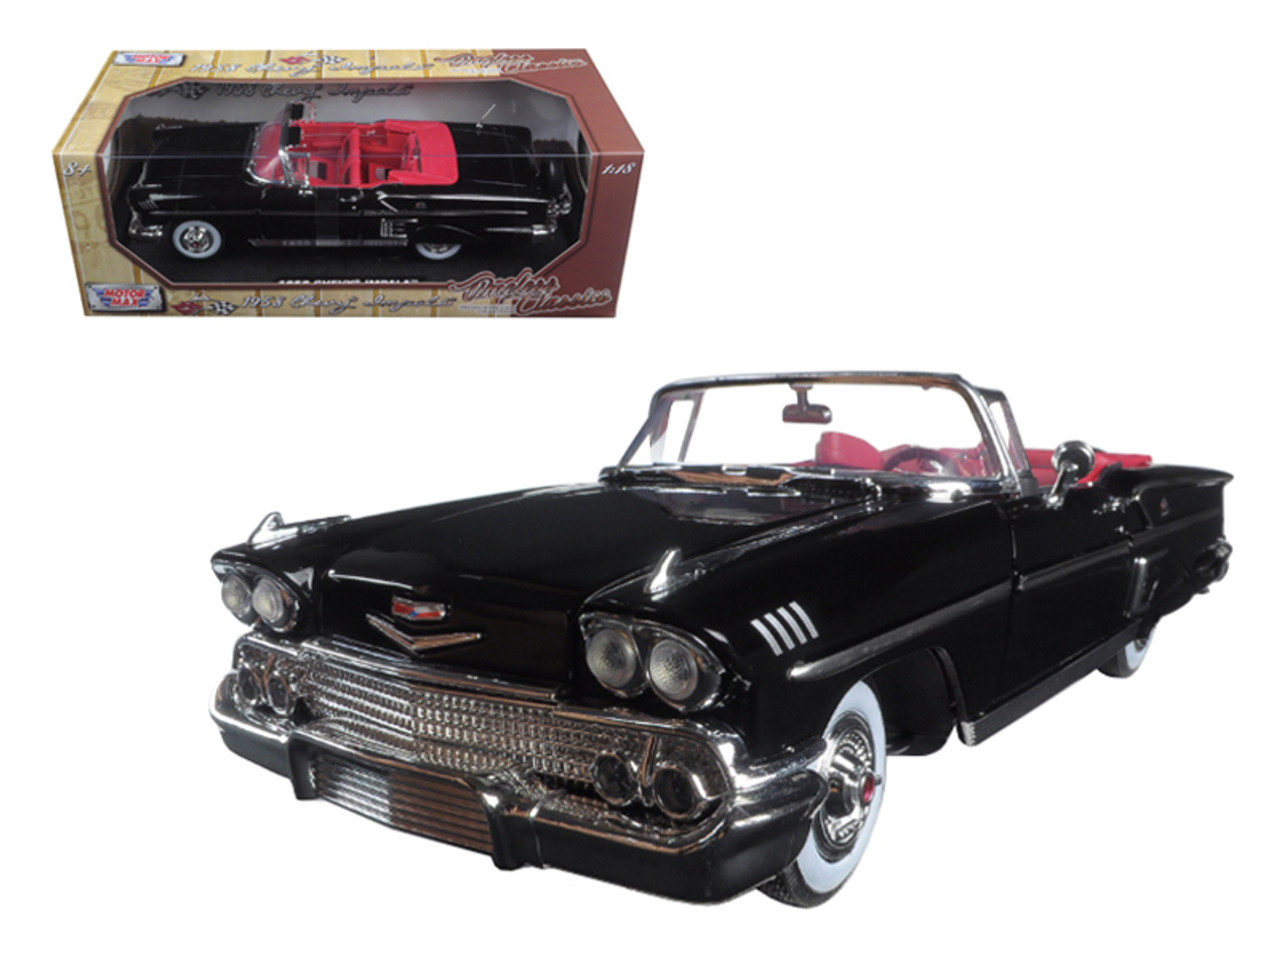 1/18 Motormax 1958 Chevrolet Chevy Impala Convertible Black with Red Interior "Timeless Classics" Diecast Car Model